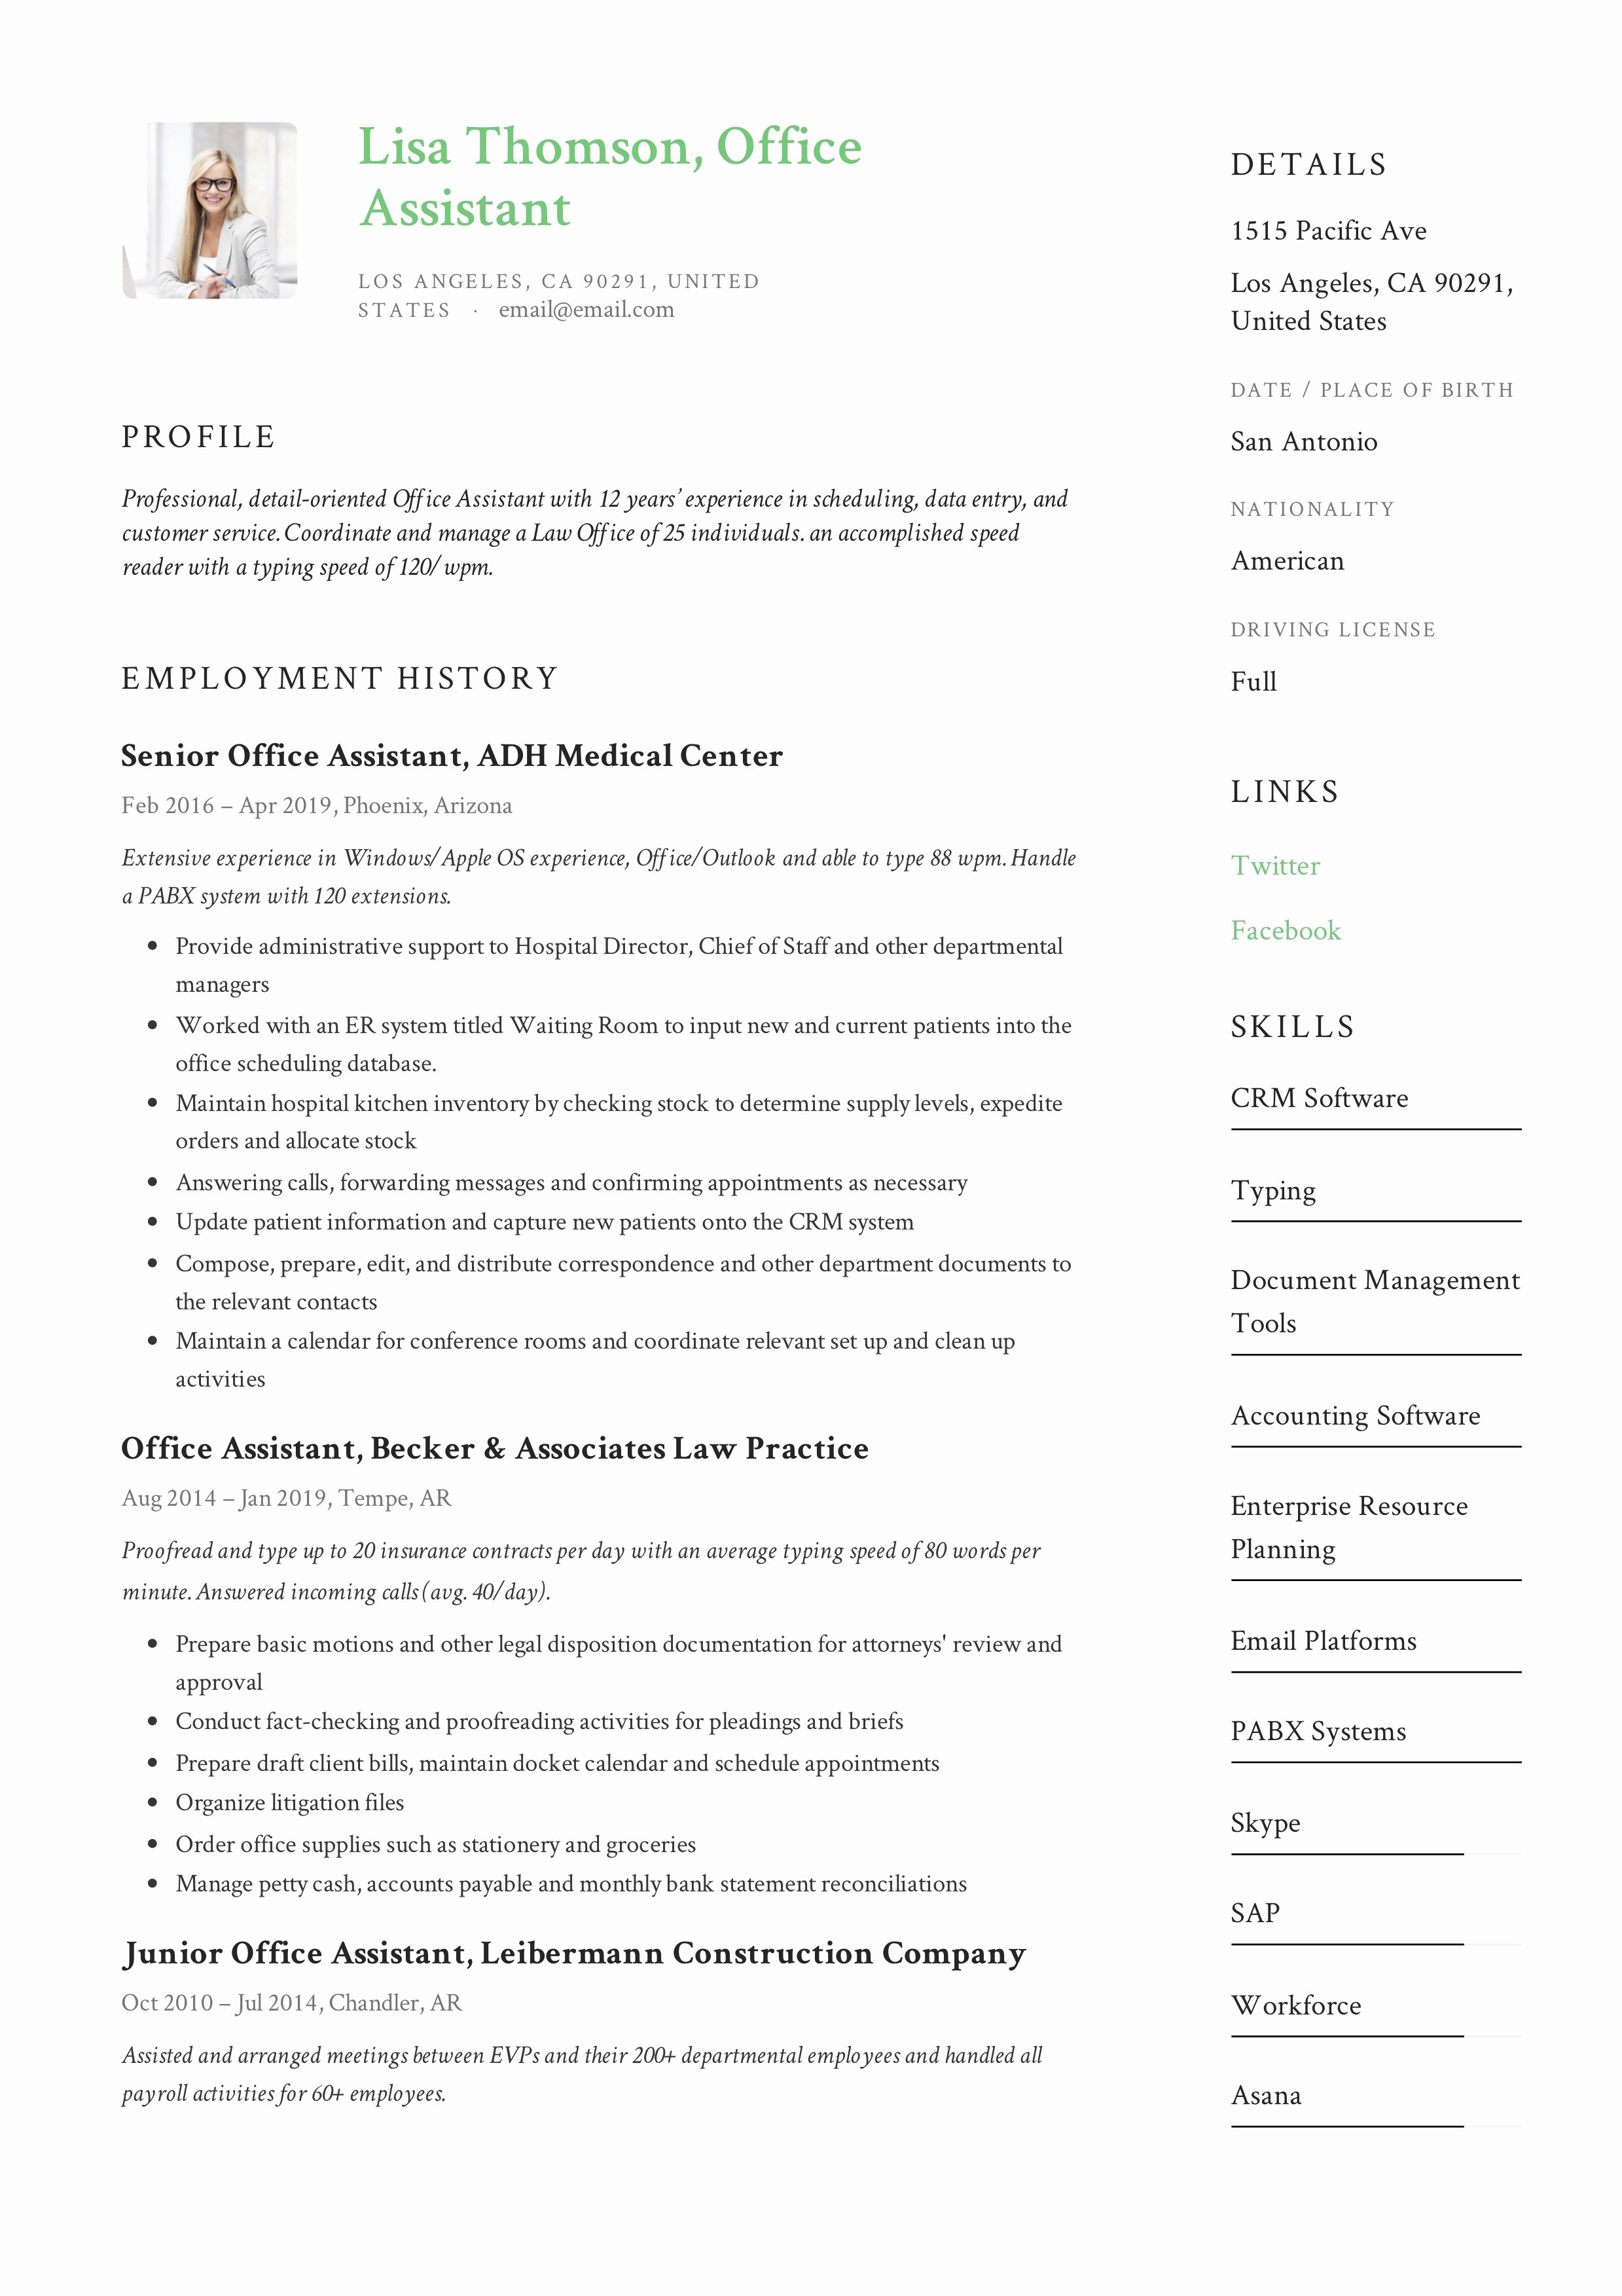 Office assistant Resume Template Beautiful Fice assistant Resume Writing Guide